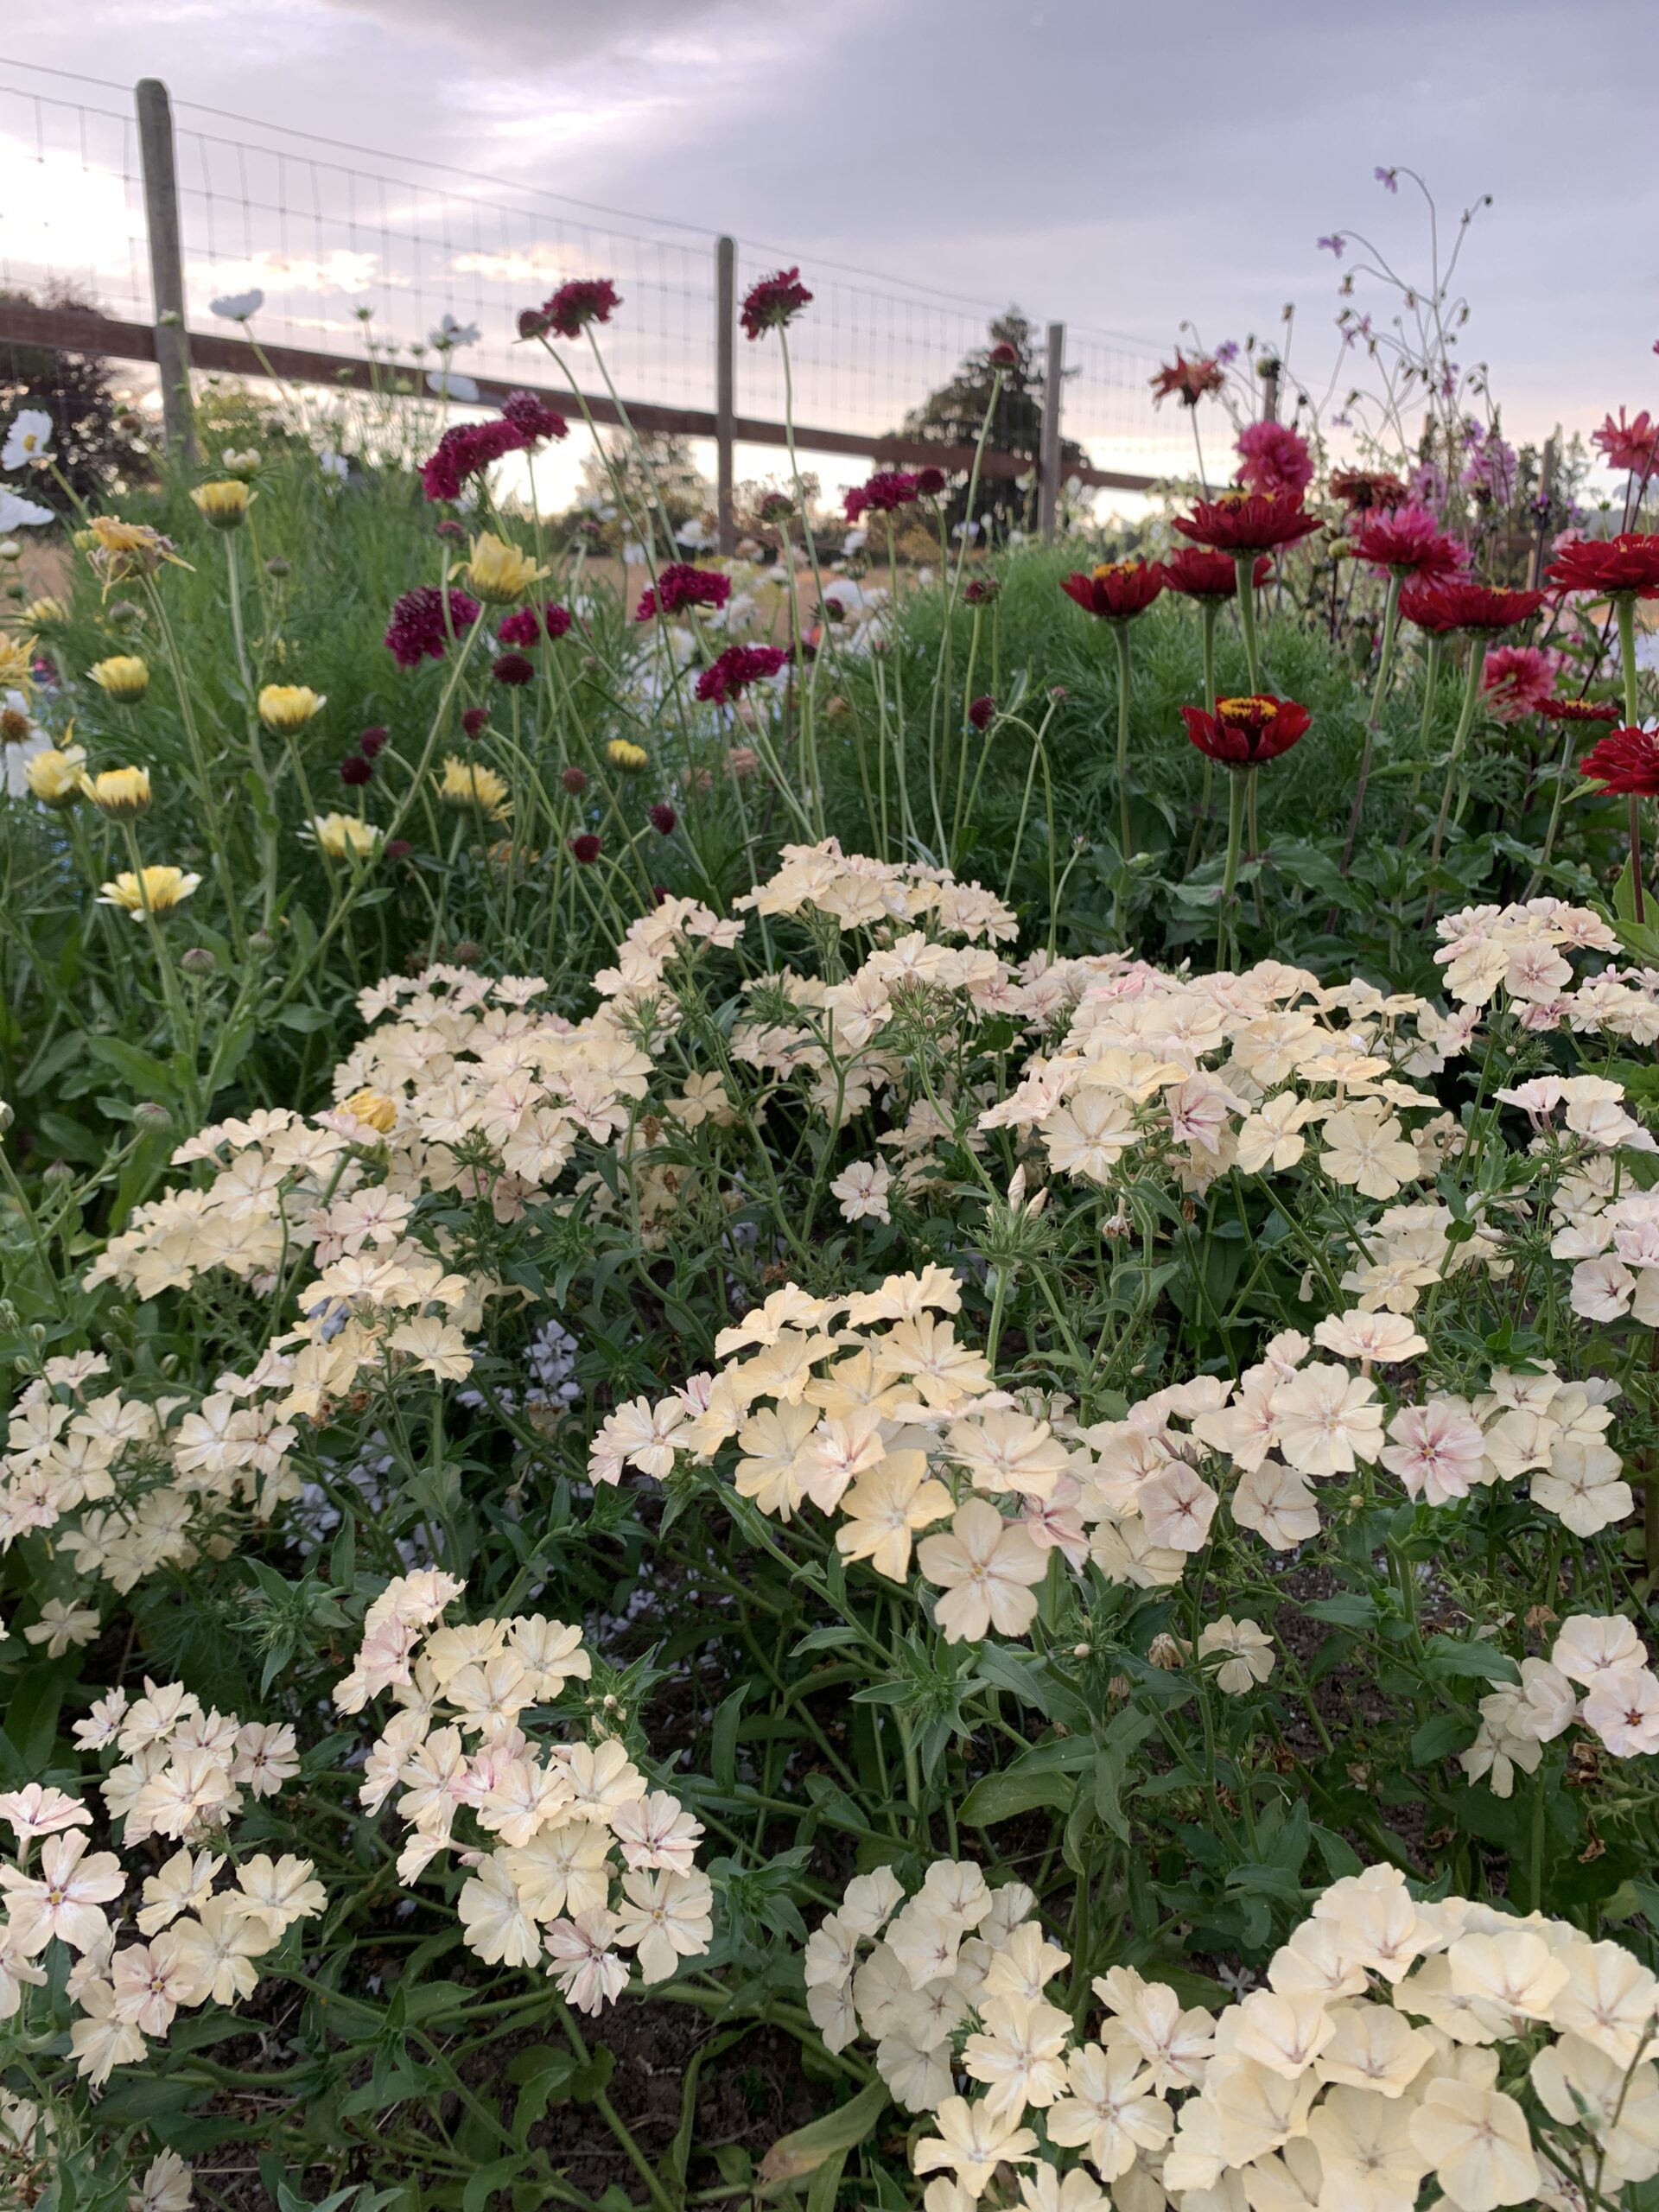 Phlox drummondii are hard working annuals that can pull through the summer with minimal deadheading and not a lot of water. This is my favourite variety, ‘Creme Brulee’, with Calendula ‘Ivory Princess’, Scabiosa ‘Merlot’ and Zinnia ‘Benary’s Giant Deep Red’ behind.